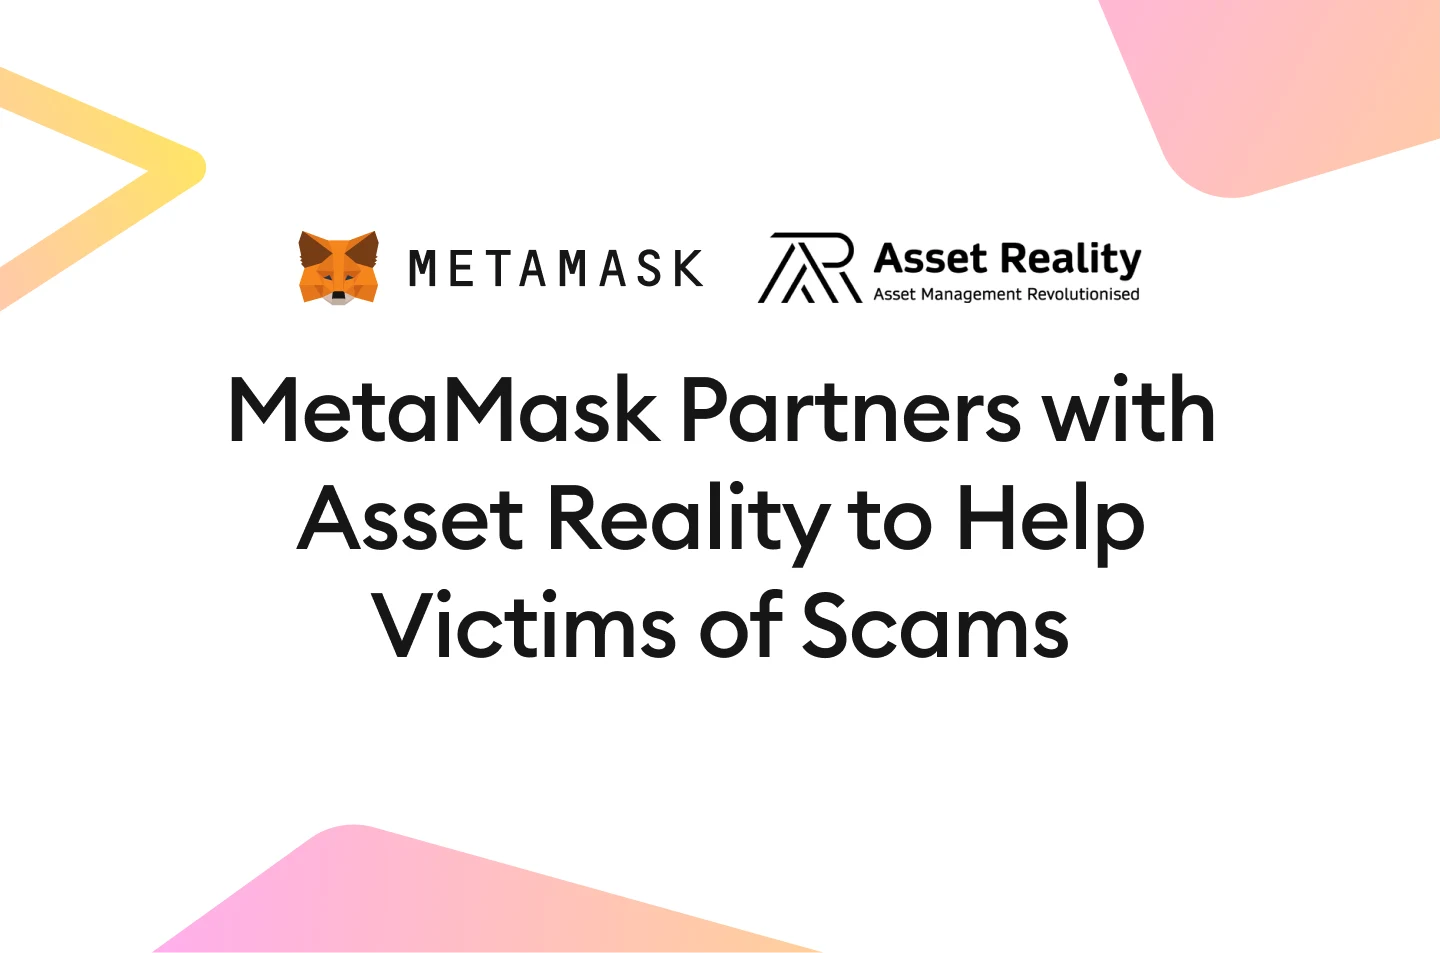 Image: MetaMask Partners with Asset Reality to Help Victims of Scams In Their Efforts to Recover Stolen Digital Assets